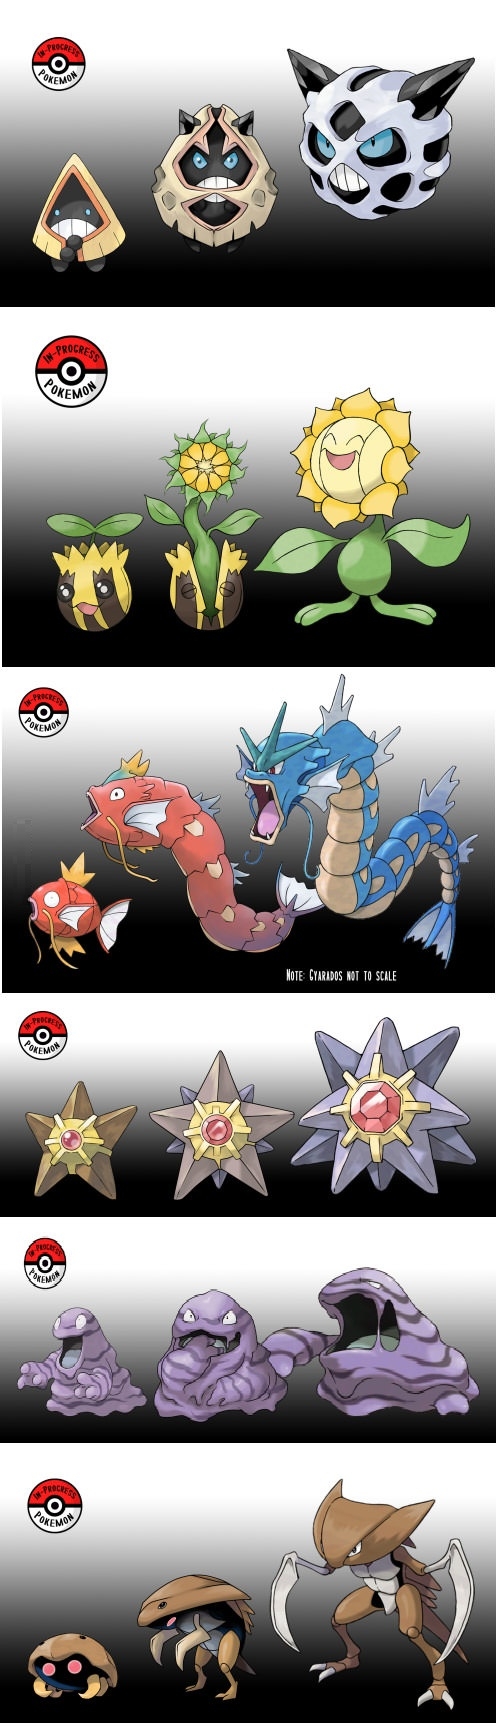 If Pokemon didn't evolve all at once